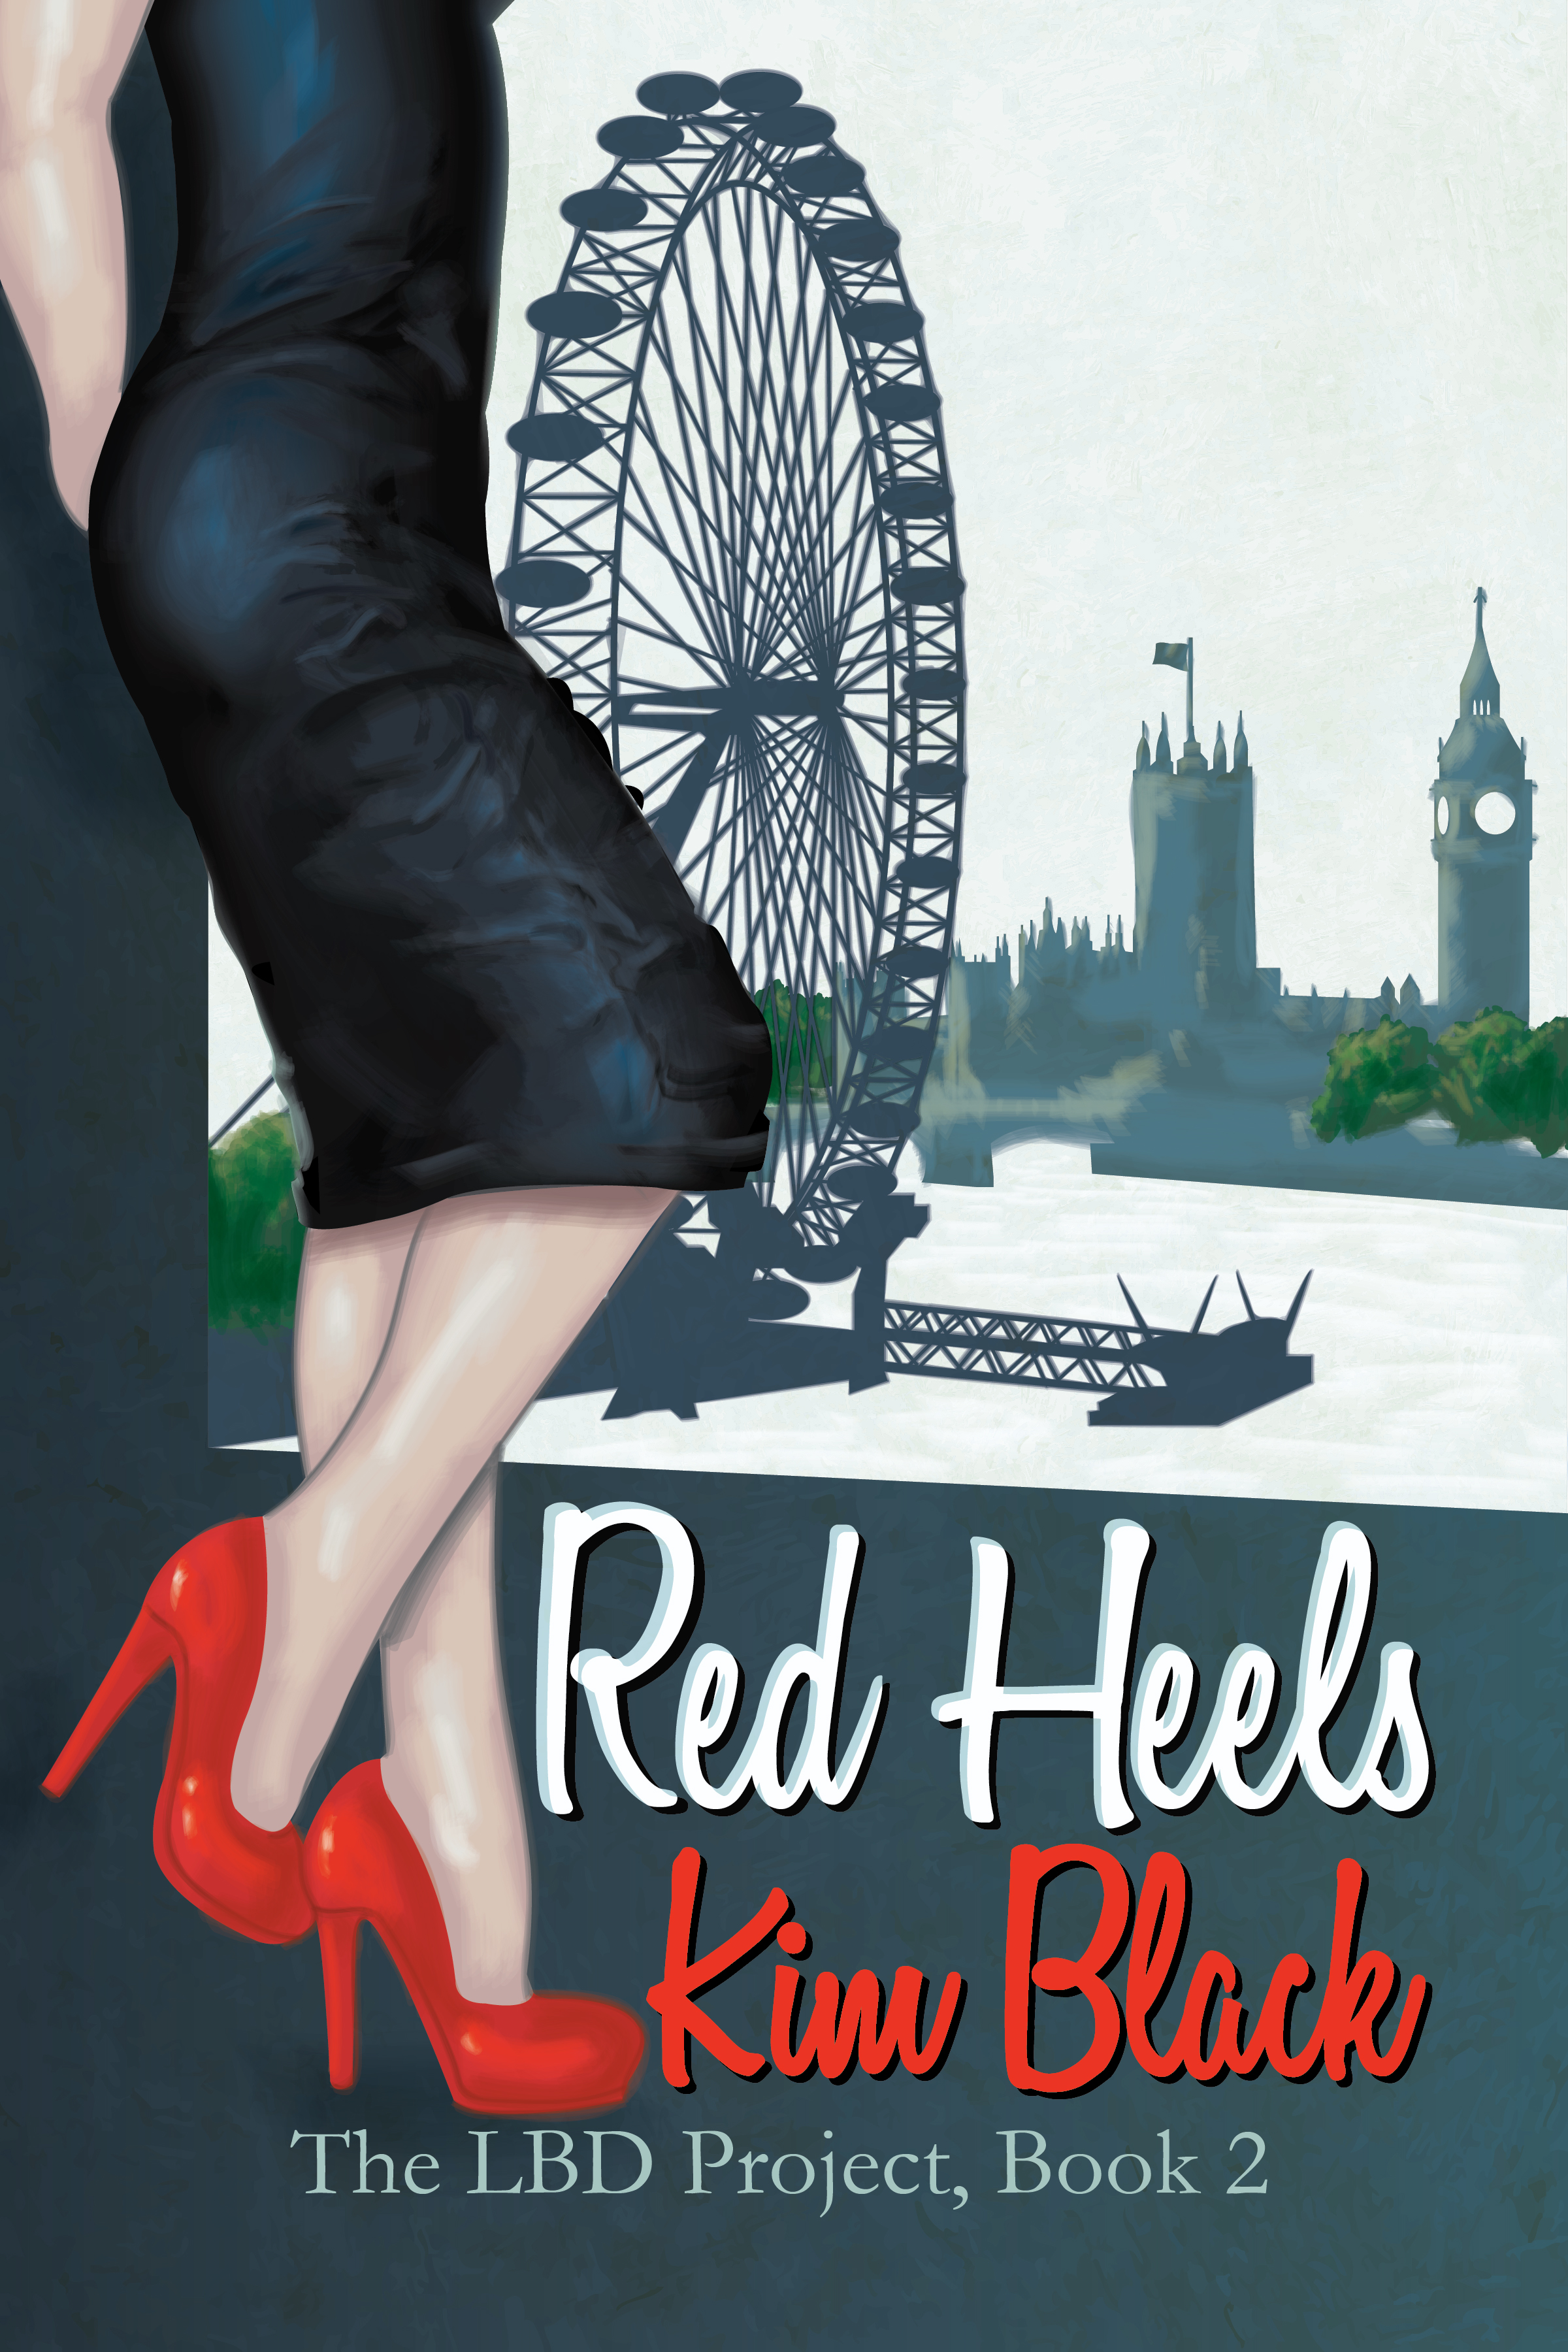 RED HEELS LBD PROJECT BOOK 2 COVER ART